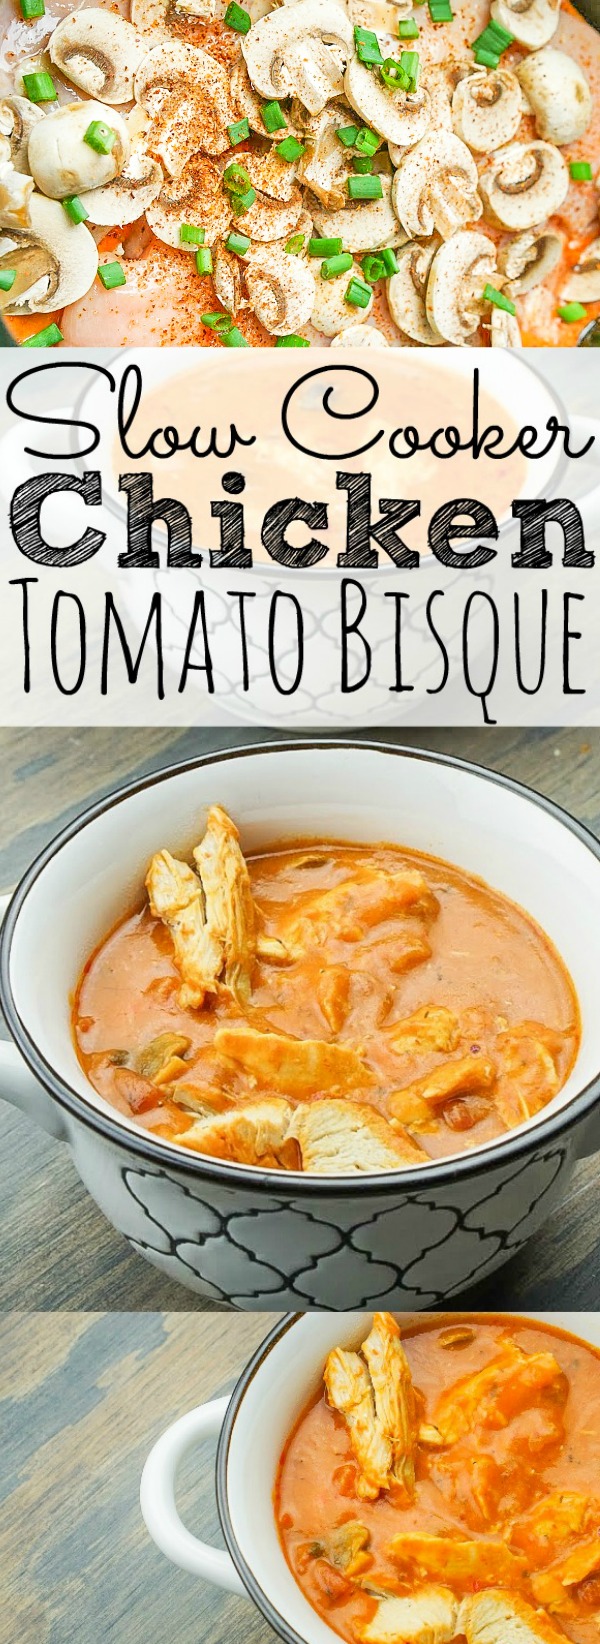 Slow Cooker Chicken Tomato Bisque Soup